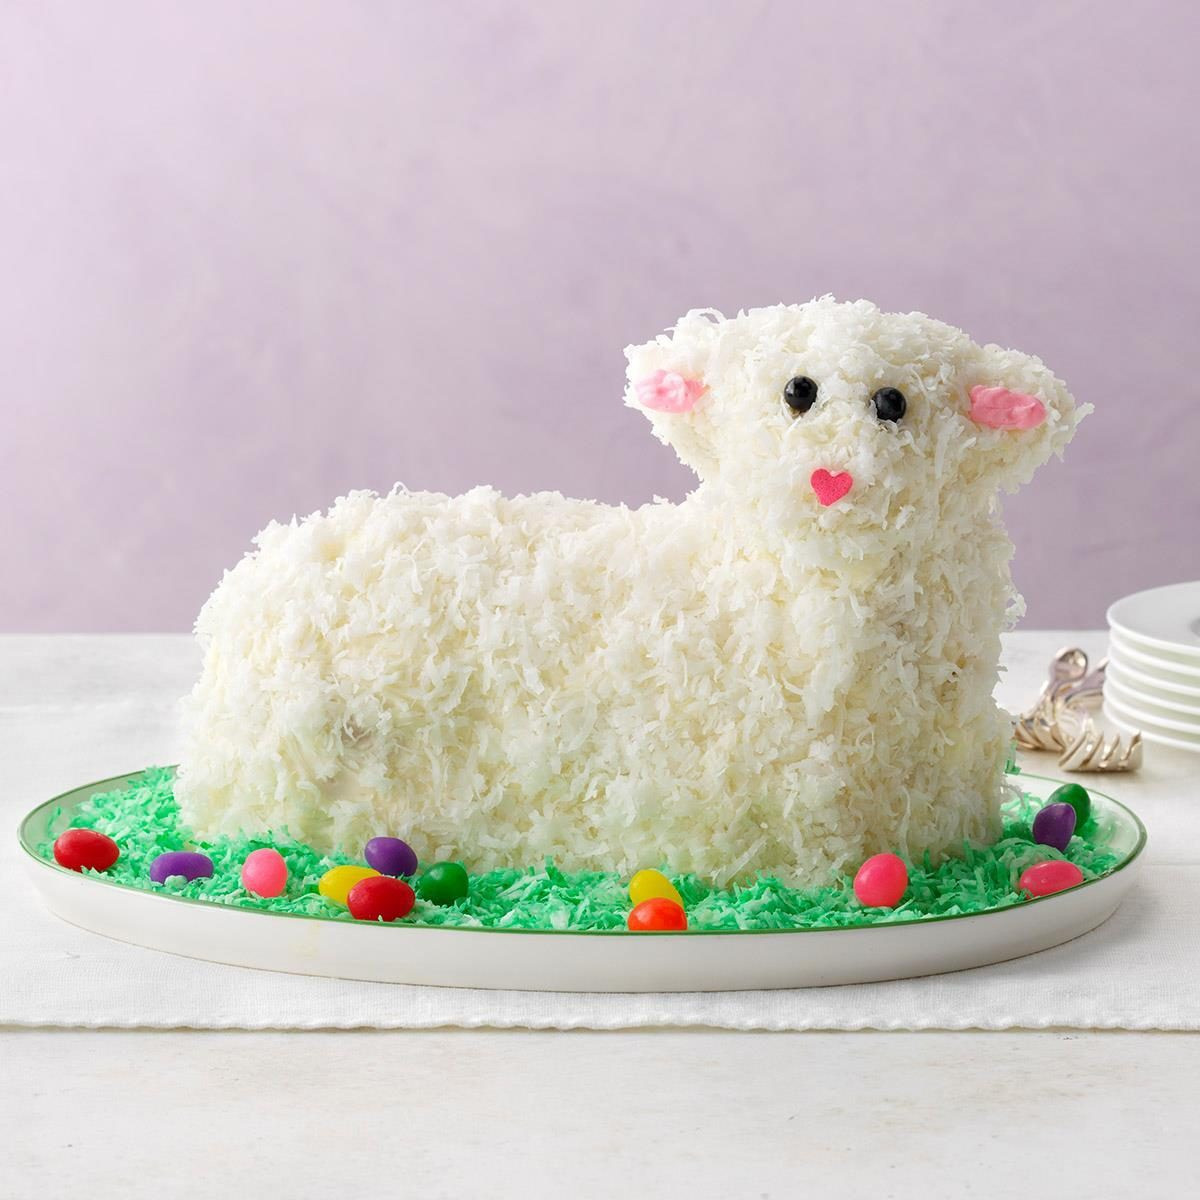 Easter Lamb Cake Best Of Easter Lamb Cake Recipe How to Make It